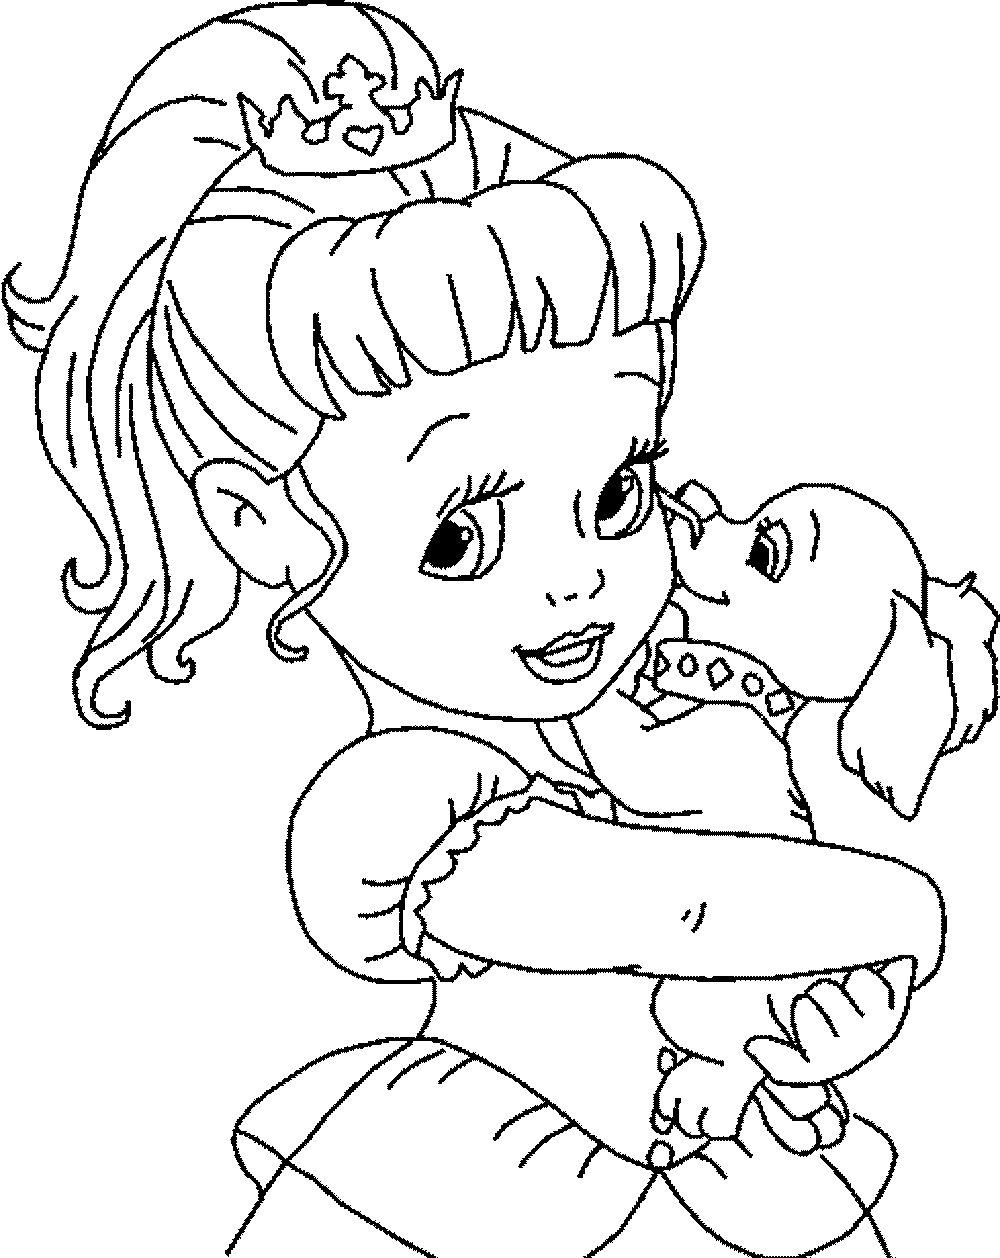 Cat Coloring Pages Cinderella - Coloring Pages For All Ages